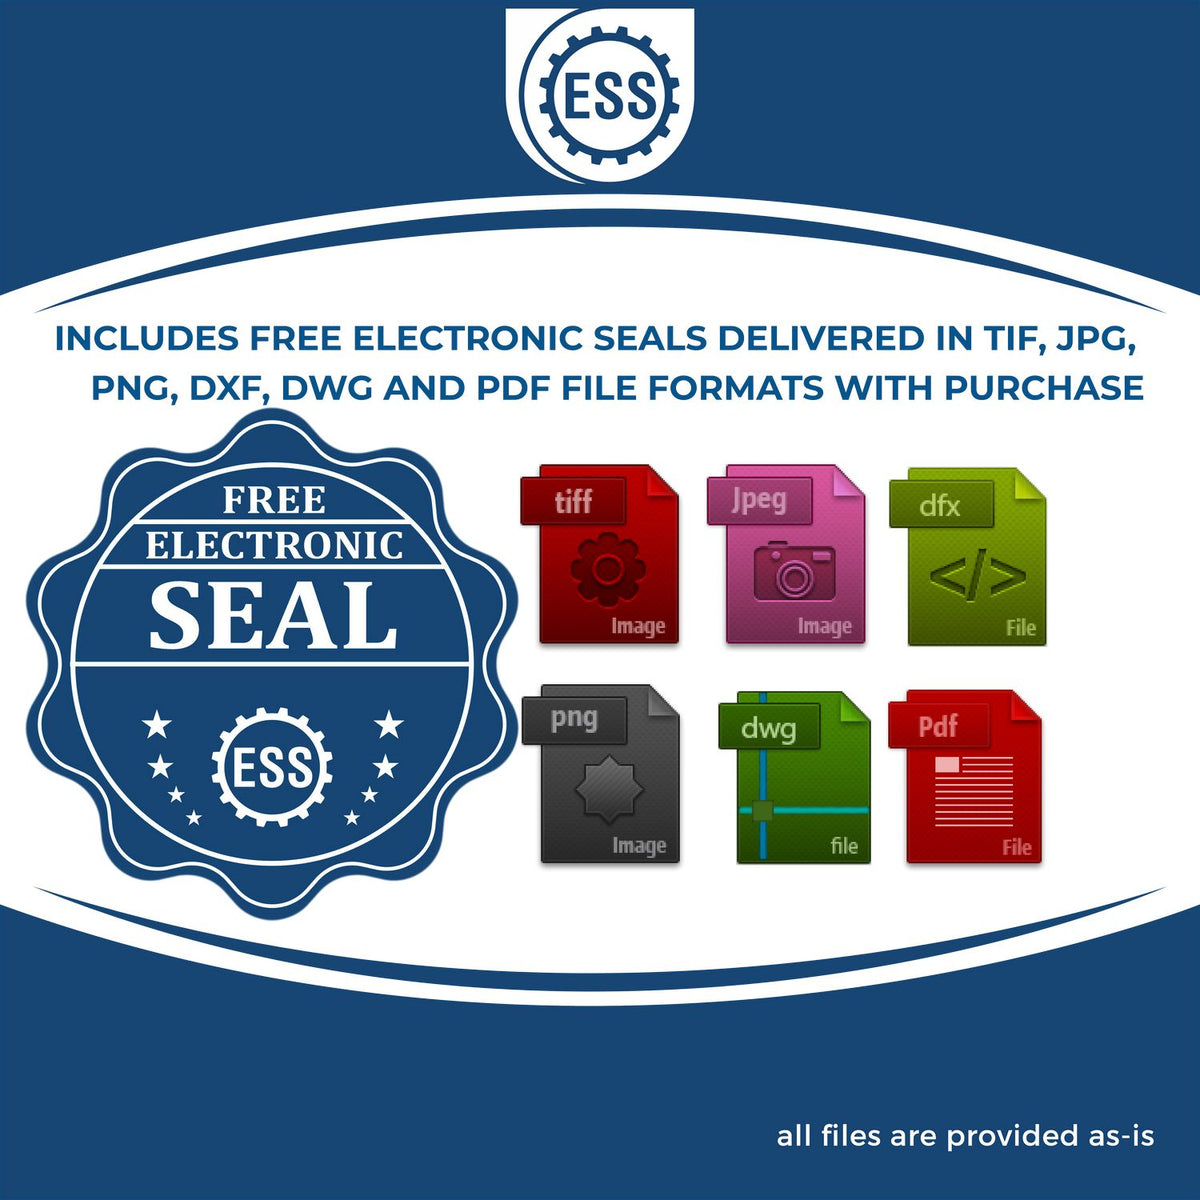 An infographic for the free electronic seal for the Arkansas Engineer Desk Seal illustrating the different file type icons such as DXF, DWG, TIF, JPG and PNG.